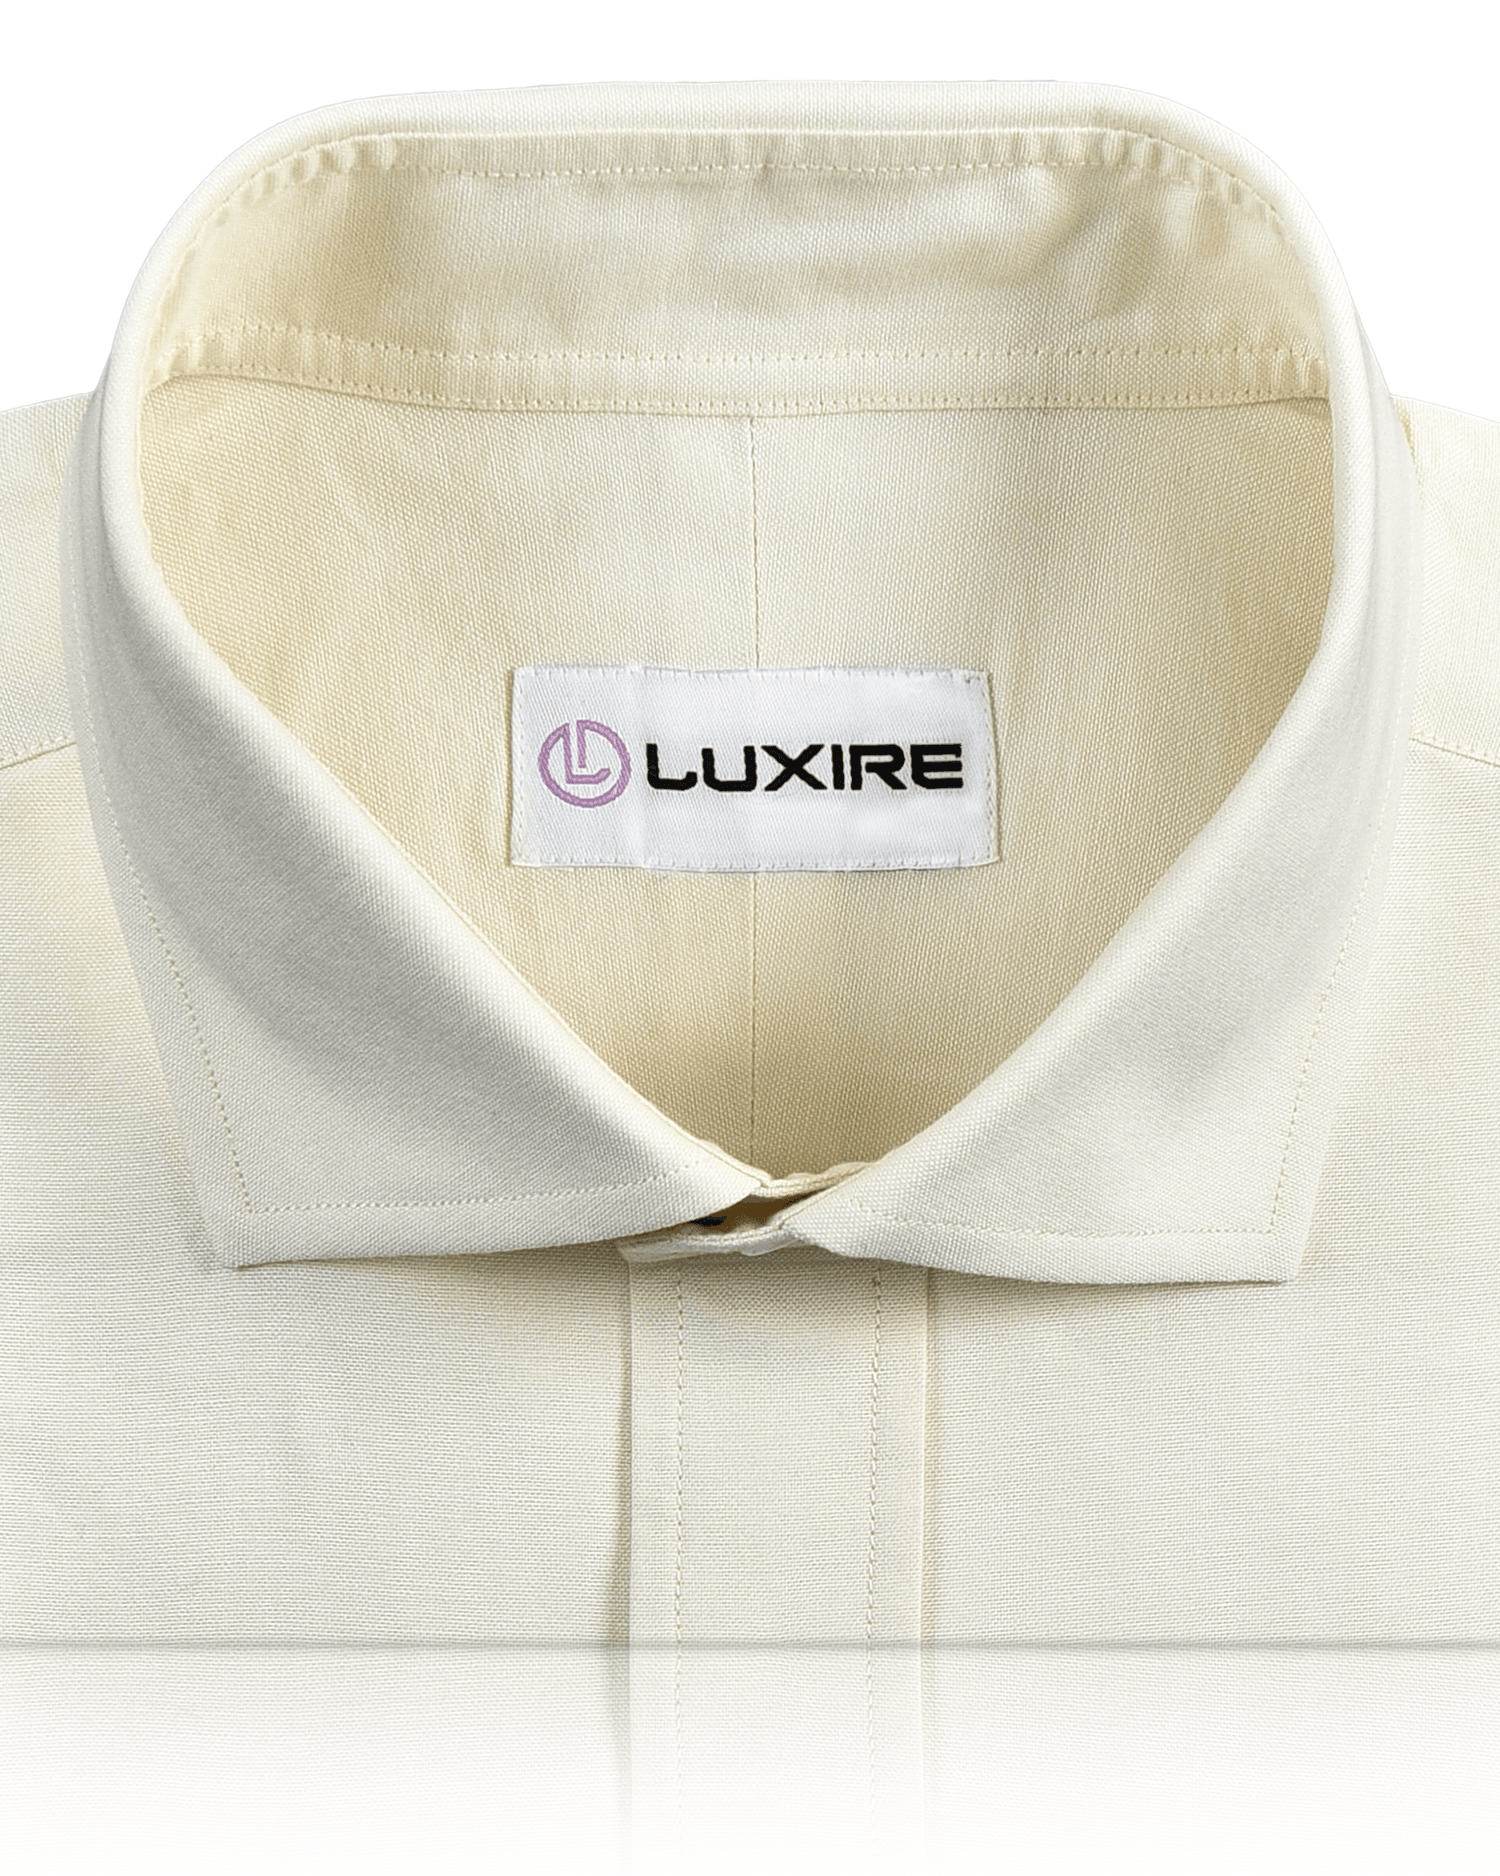 Collar of the custom oxford shirt for men by Luxire in ecru pinpoint